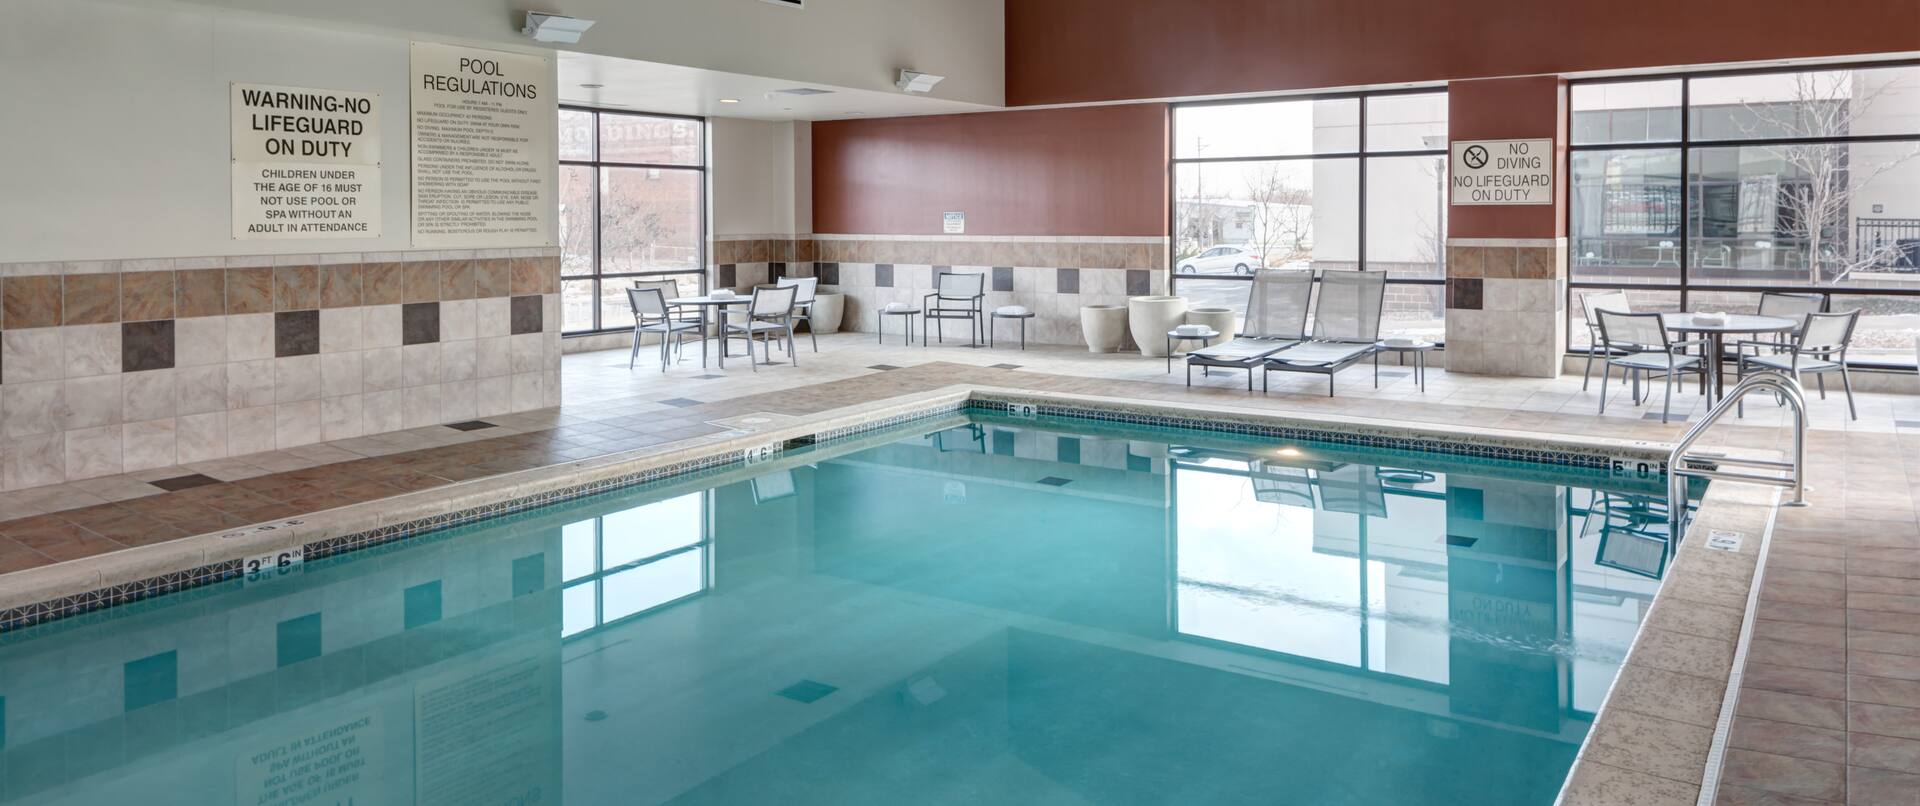 Indoor Pool With Chair and Table Seating, Loungers, and Windows With Outside Views